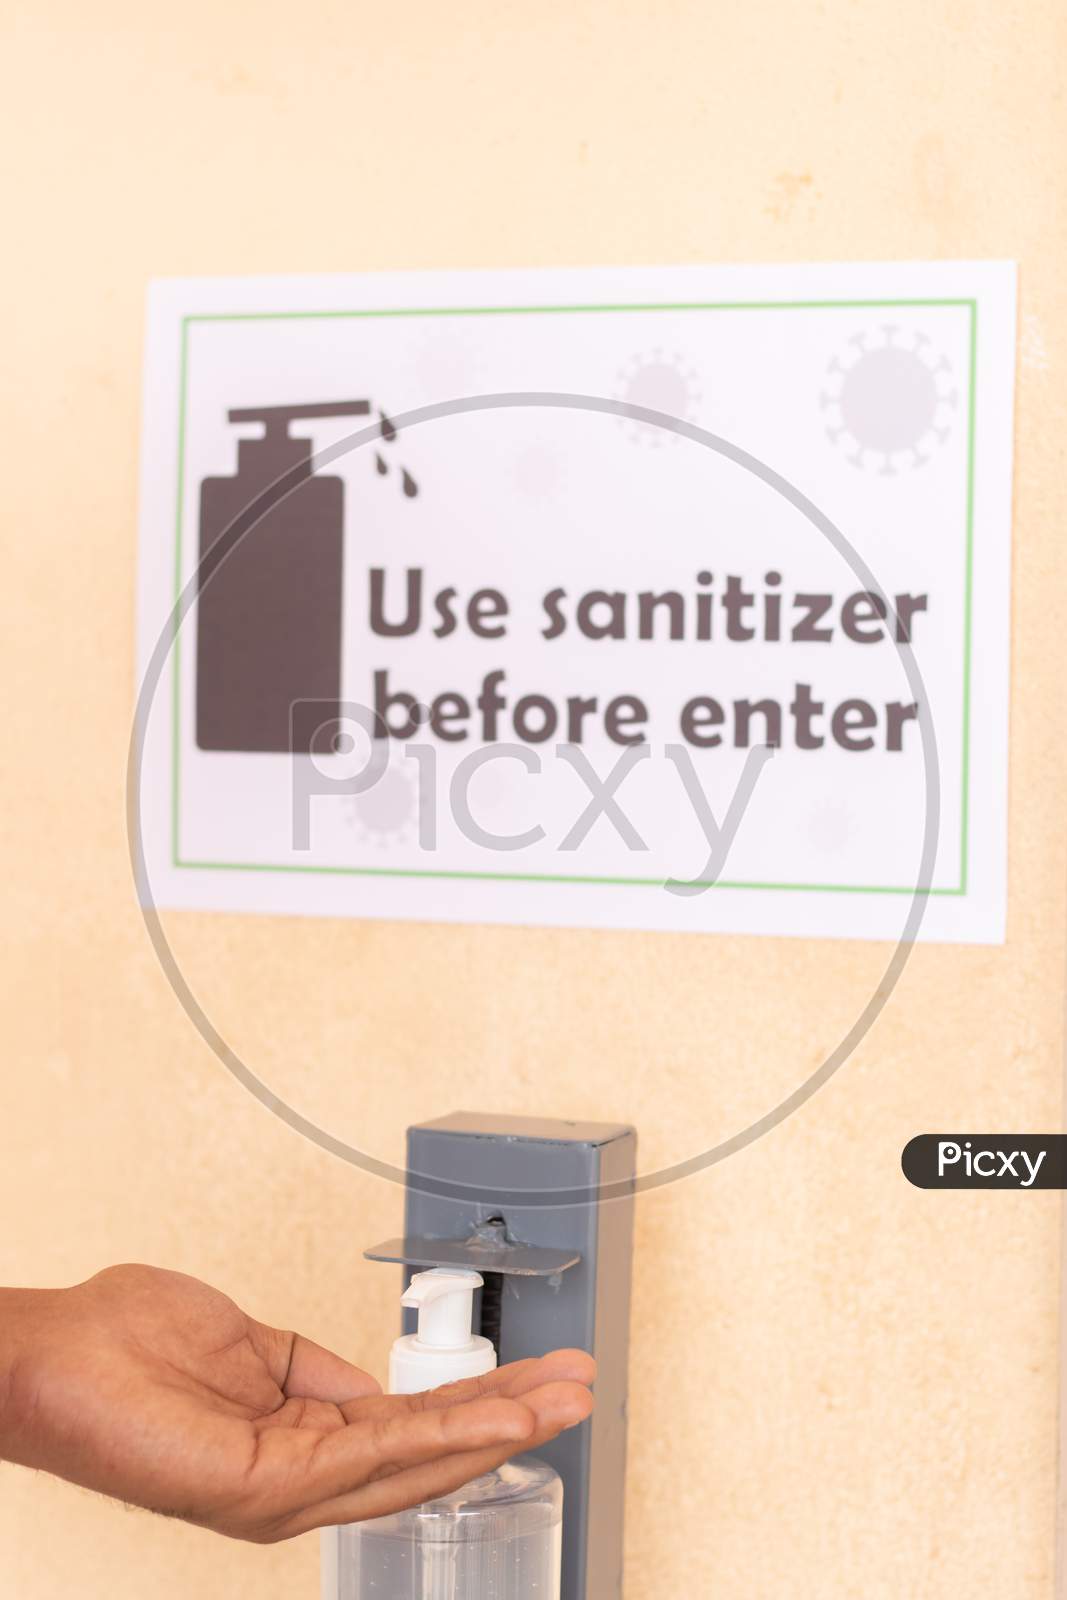 Close Up Of Hands Using Hand Sanitizer Below The Use Sanitizer Before Enter Signage Board On Wall As Safety Measure Due To Coronavirus Or Covid-19 Pandemic